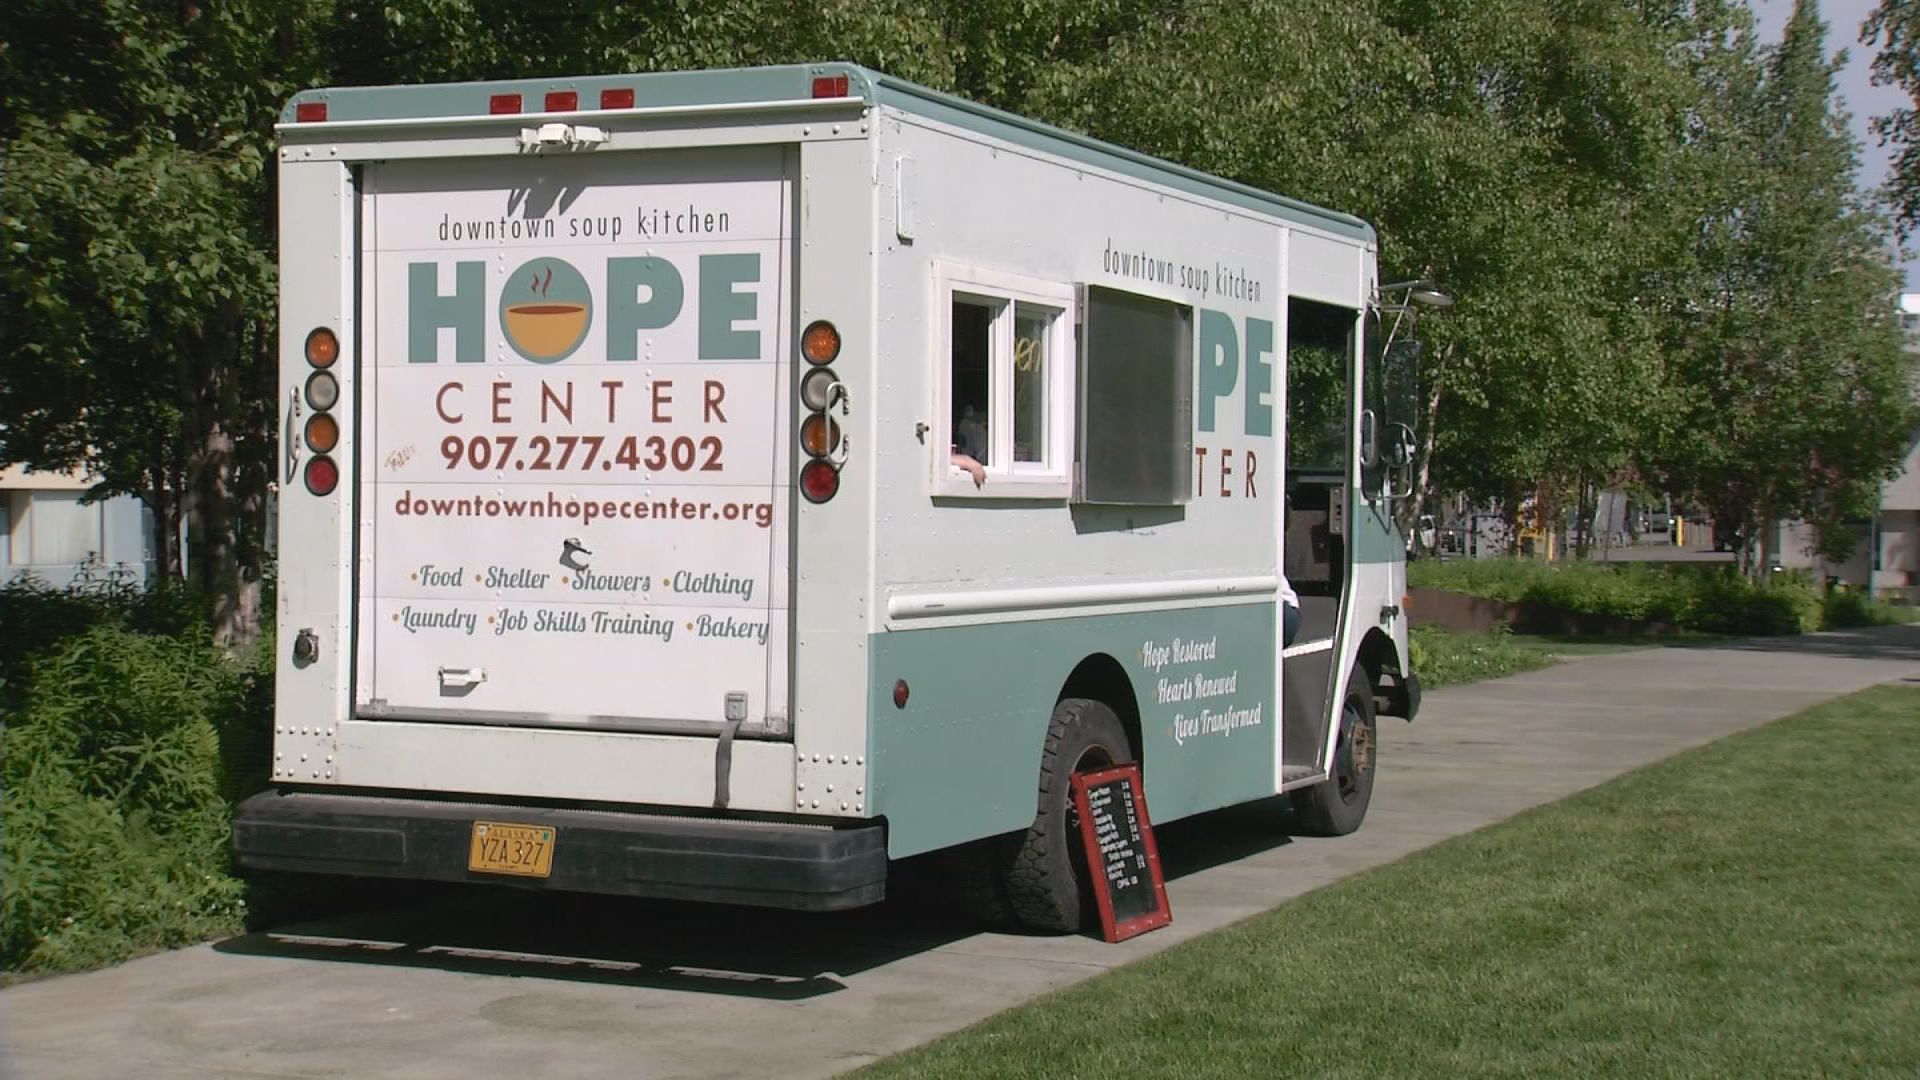 Downtown Soup Kitchen Hope Center Food